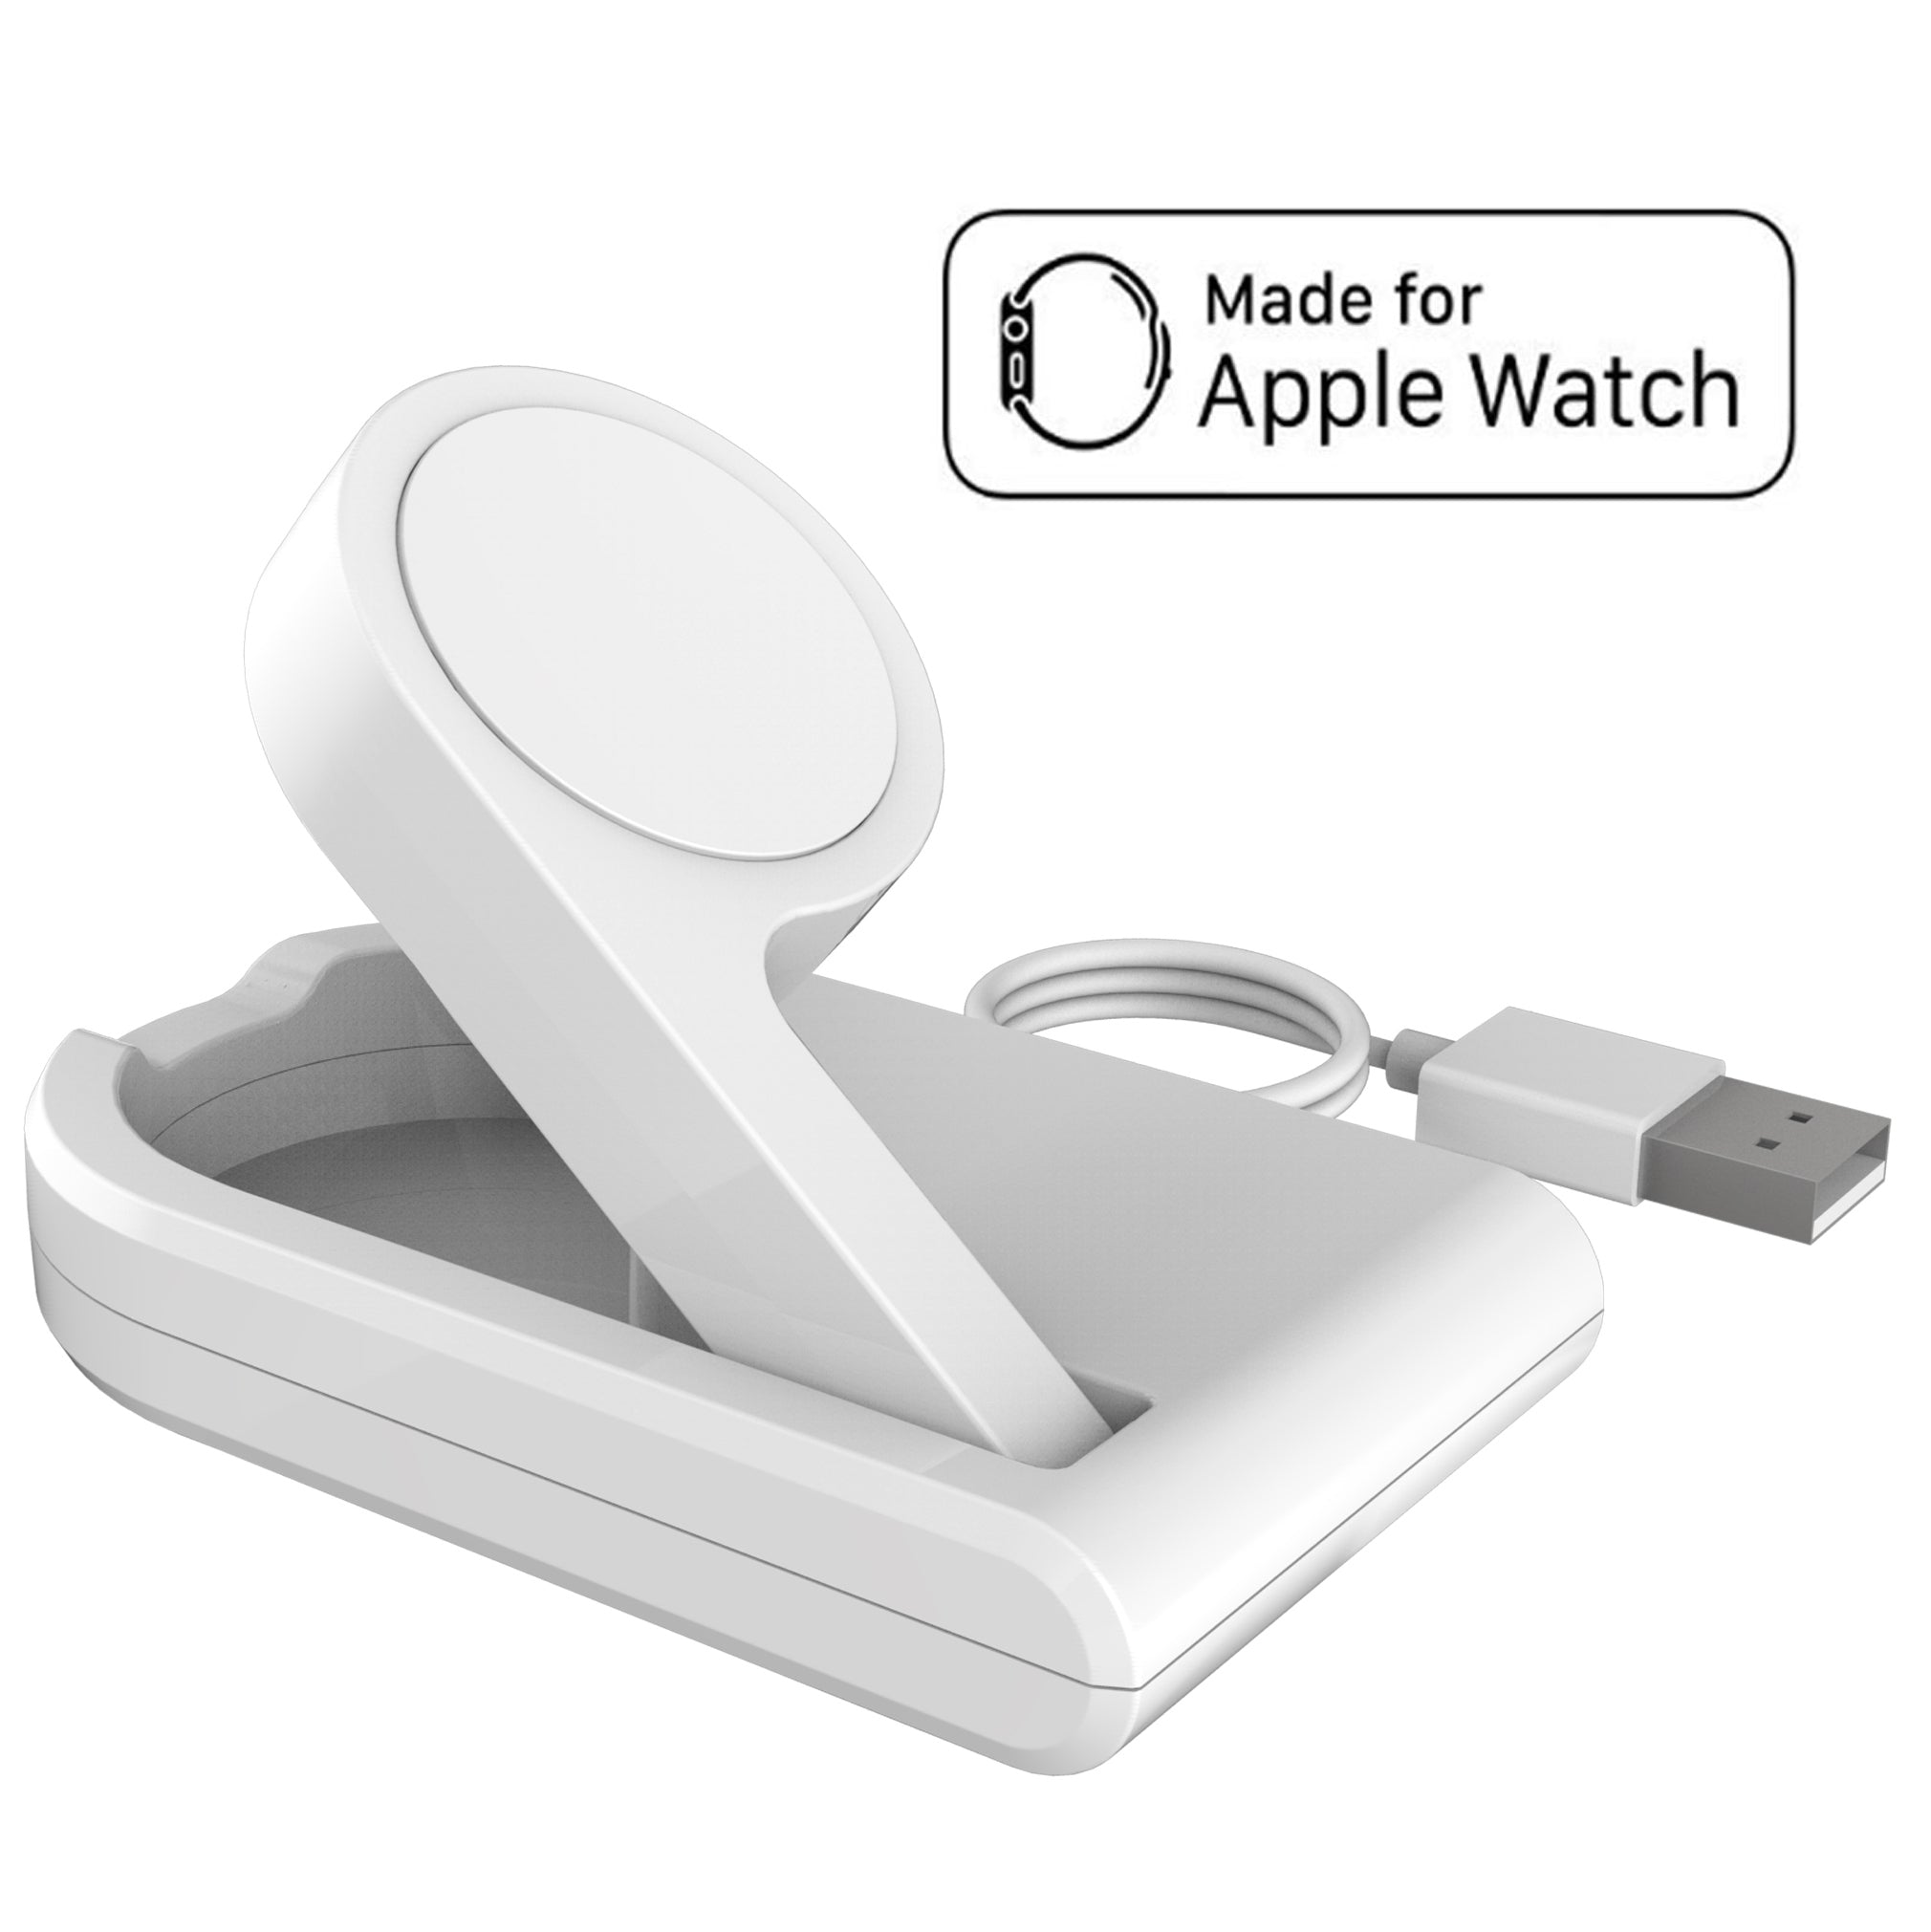 [MFI Certified] Protable Magnetic Charging Dock for All Apple Watch Models with Foldable Design to Enable Nightstand Mode, 3ft Long USB Cable